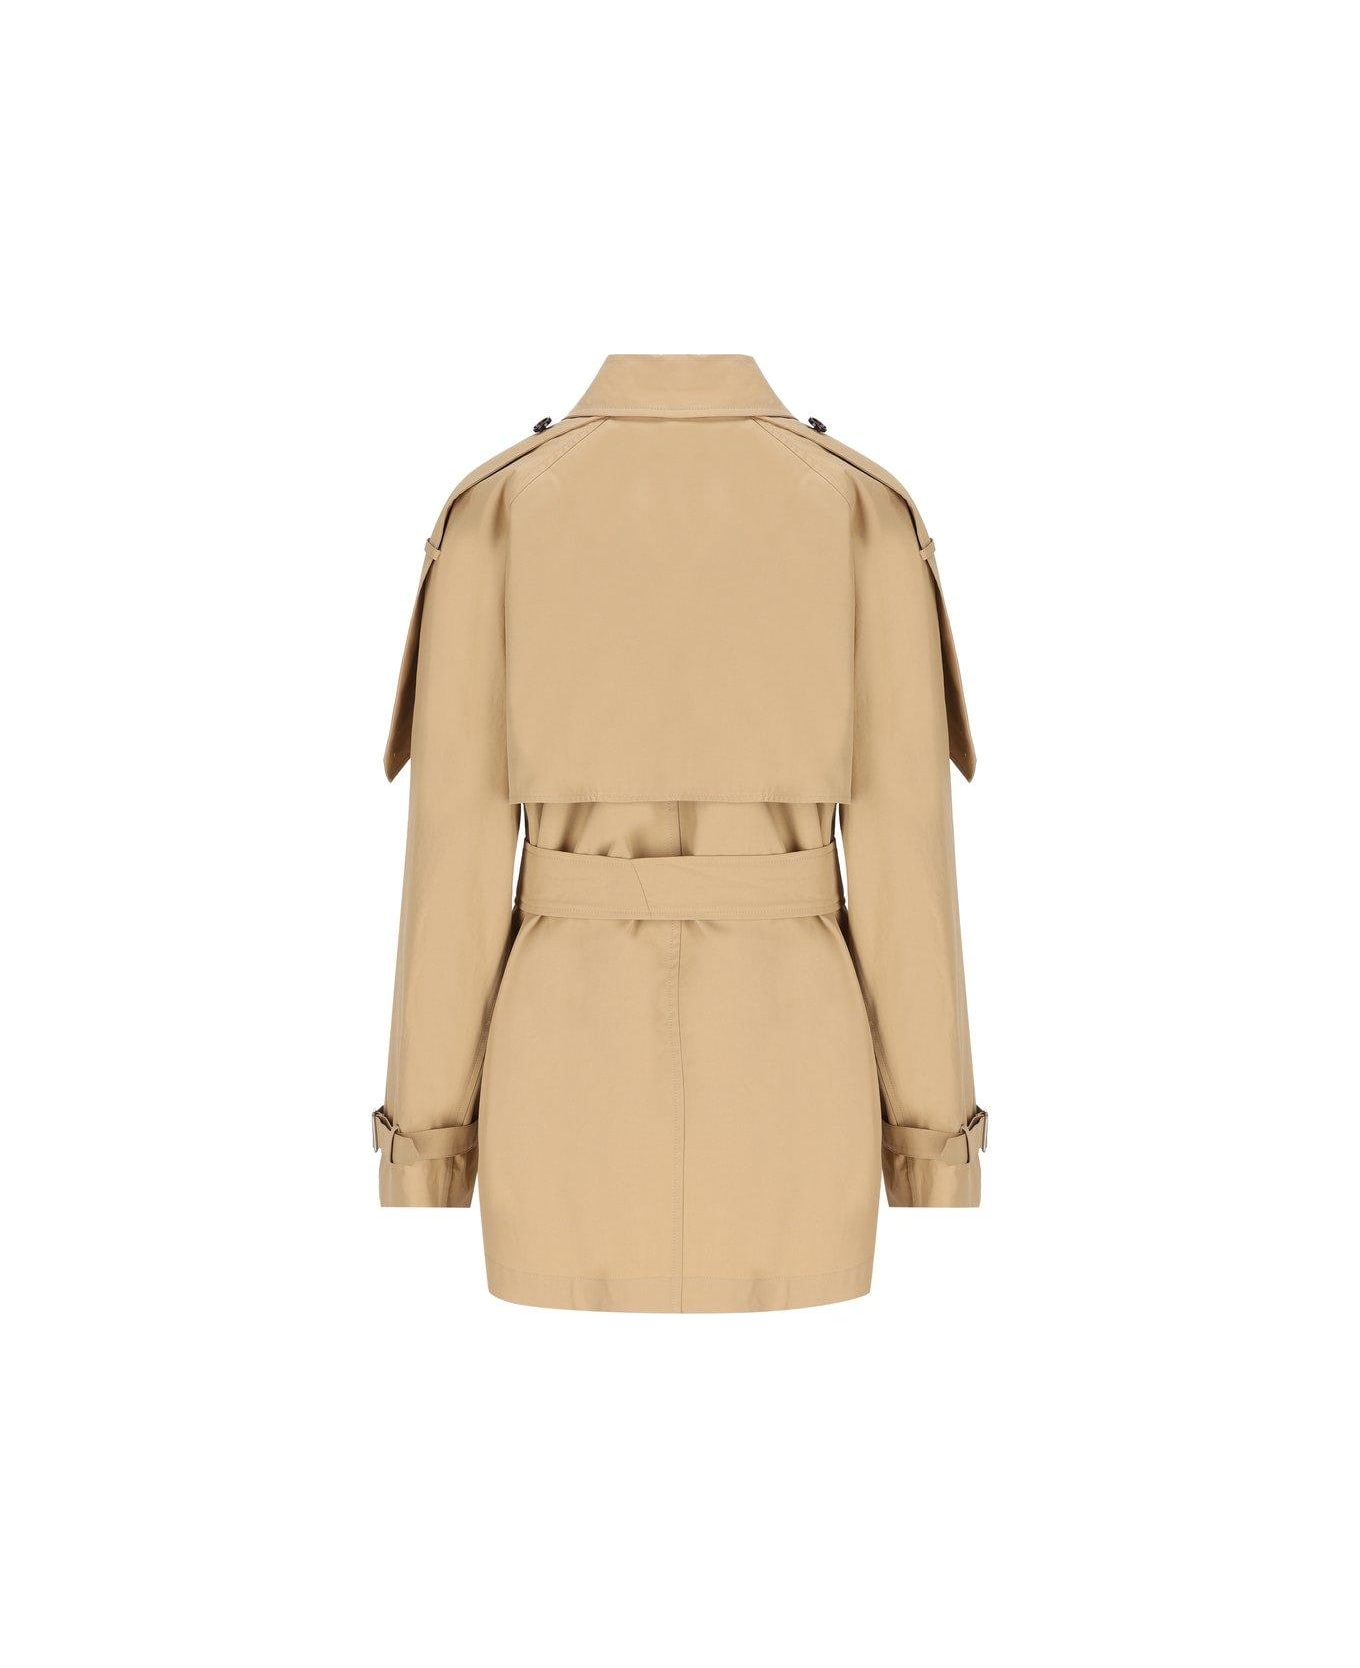 Burberry Double Breasted Belted Trench Coat - Flax レインコート